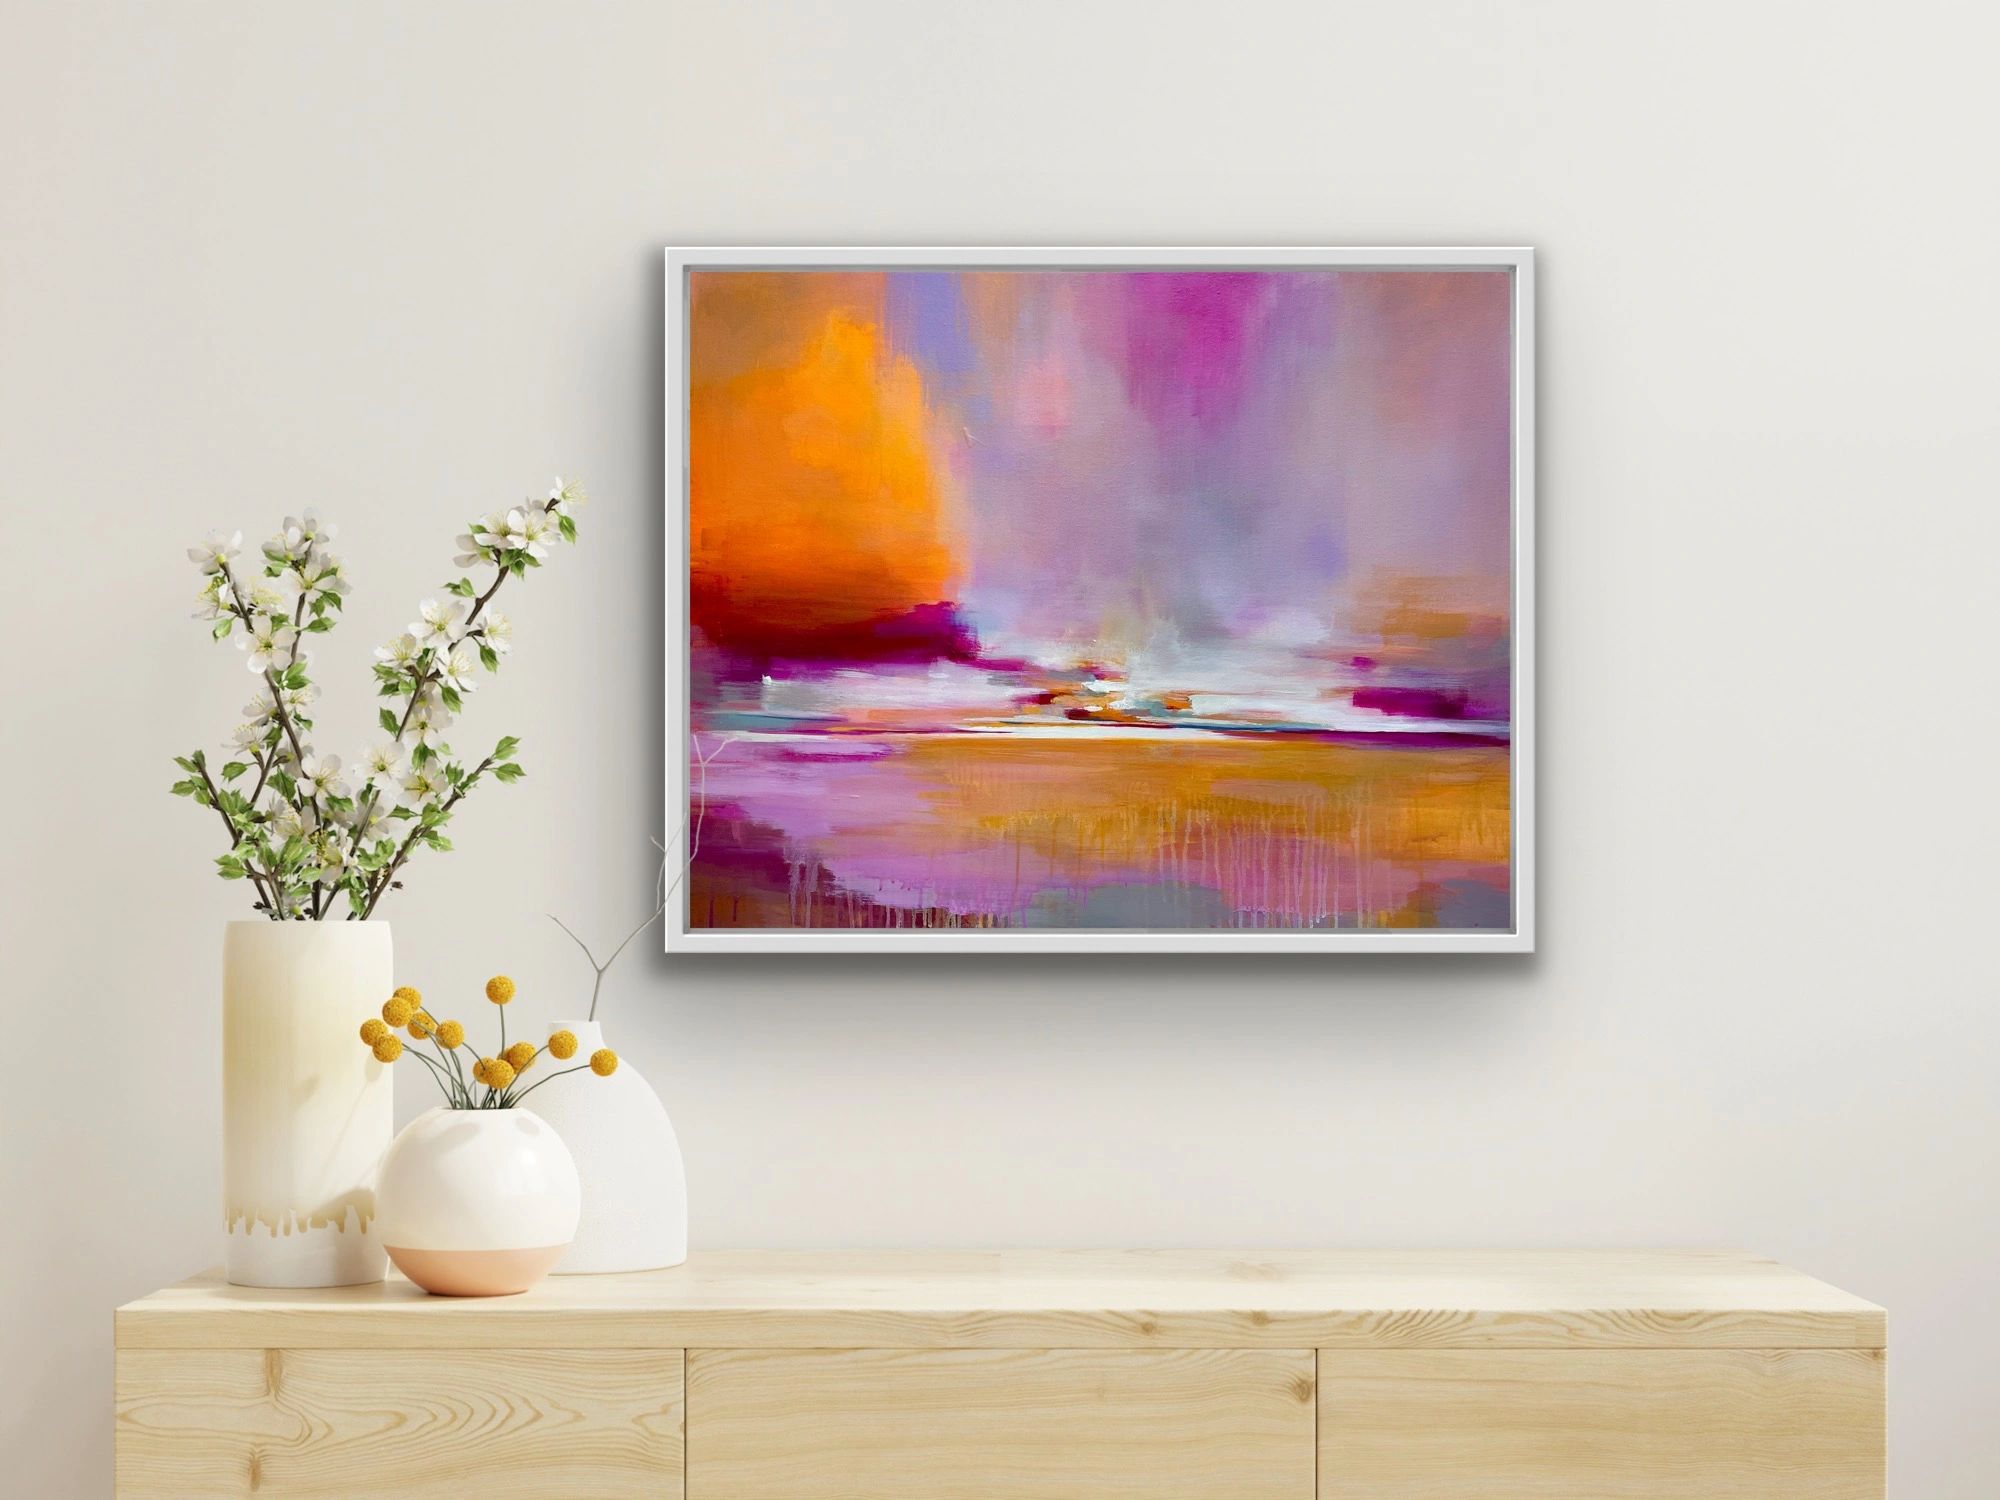 Original acrylic painting on canvas
Expressive abstract painting inspired by sunrise on the coast.